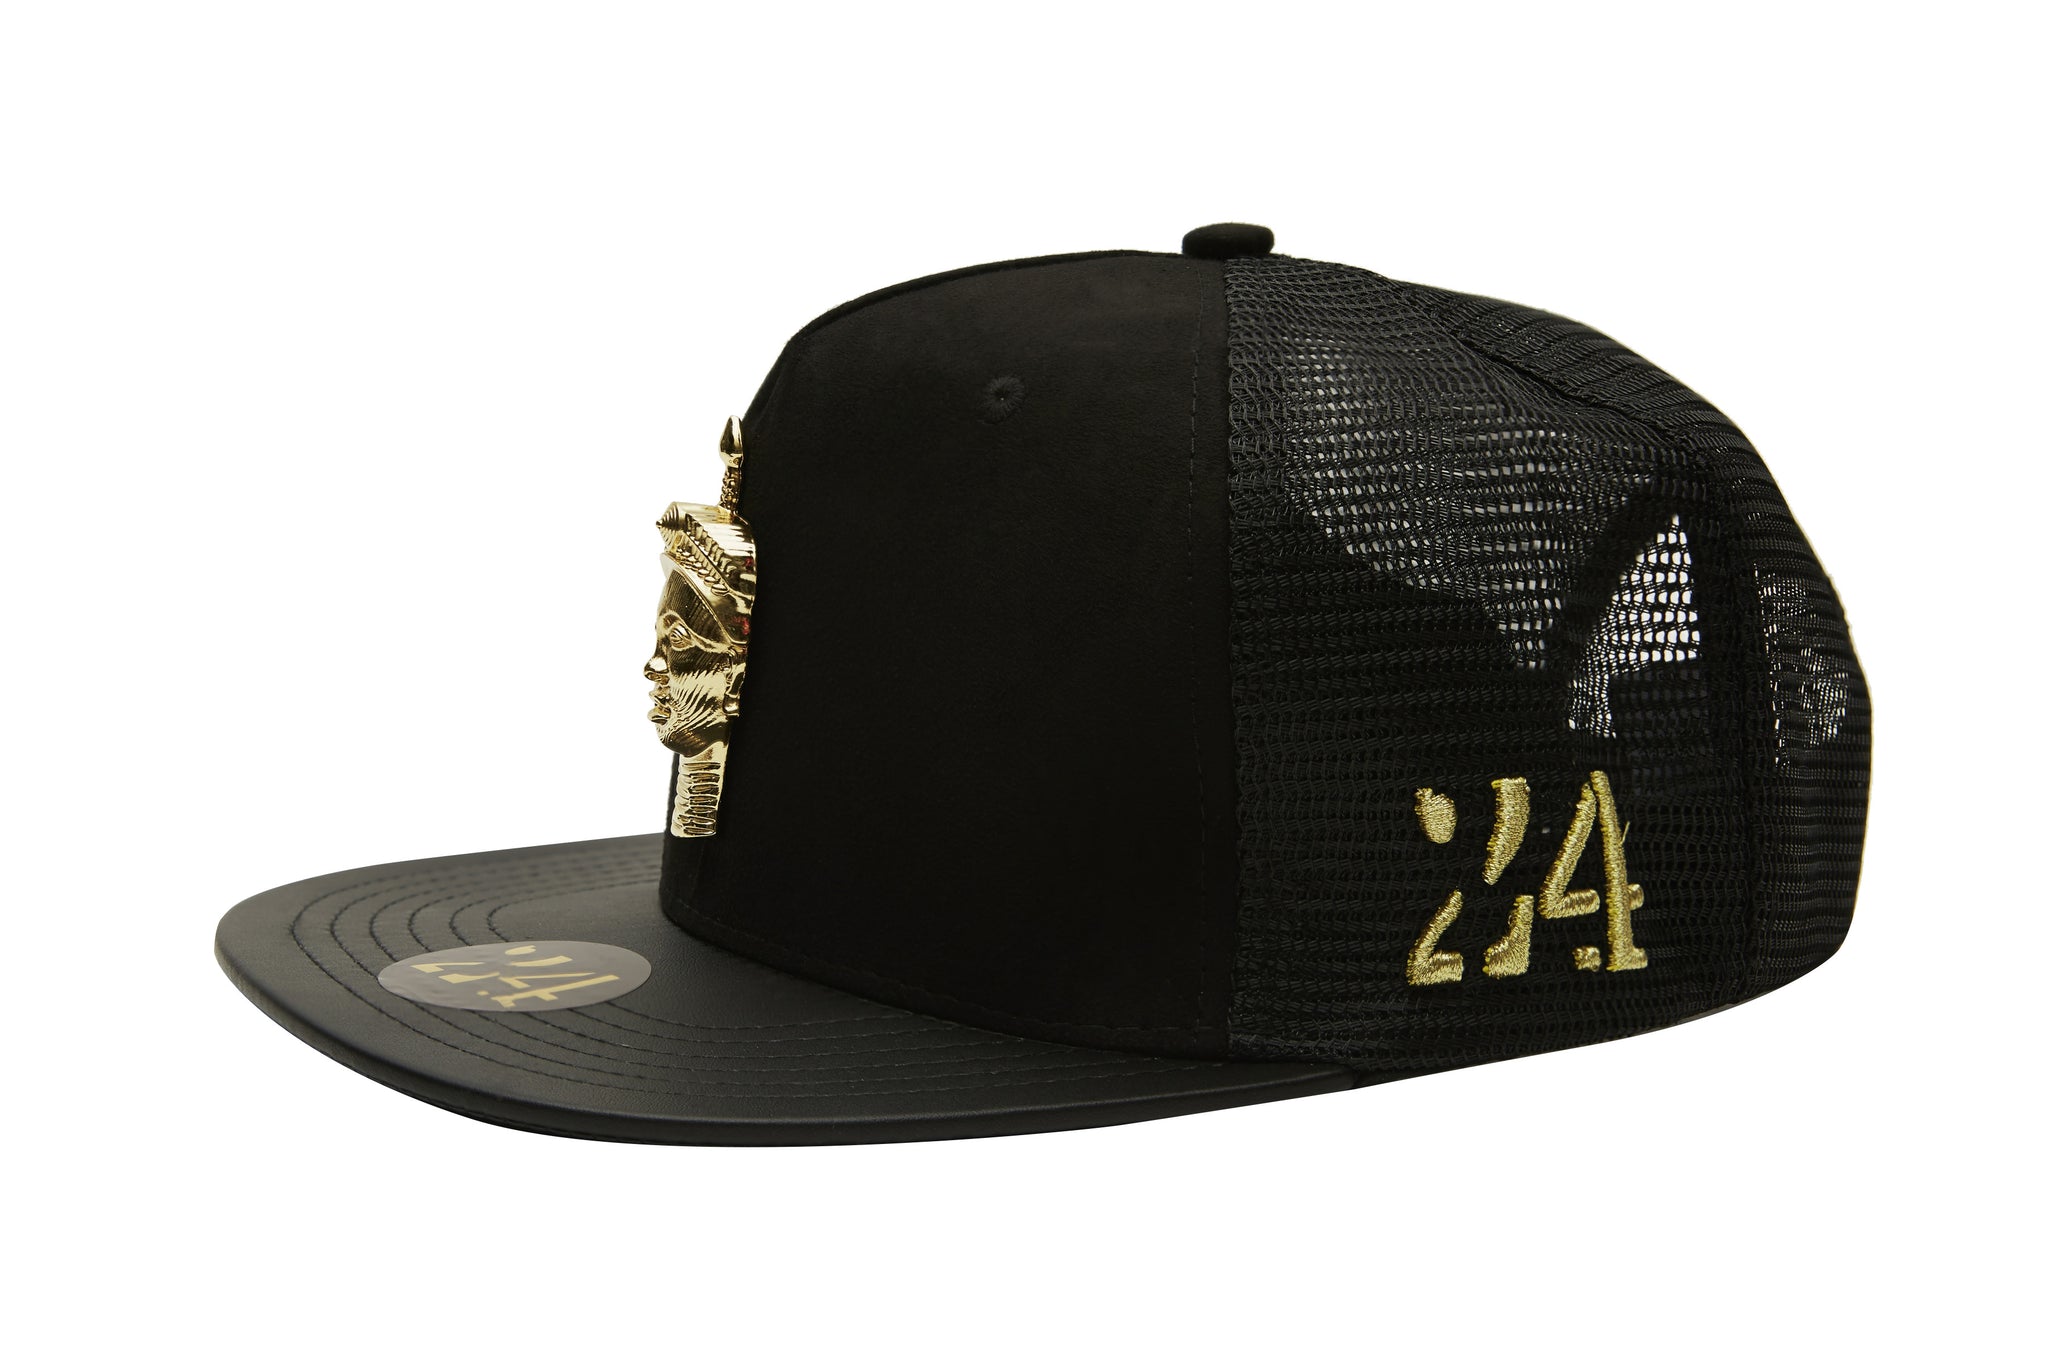 OODUA | The Ife head in “gold" plated metal on Black suede Snapback Hat by 24 Apparel